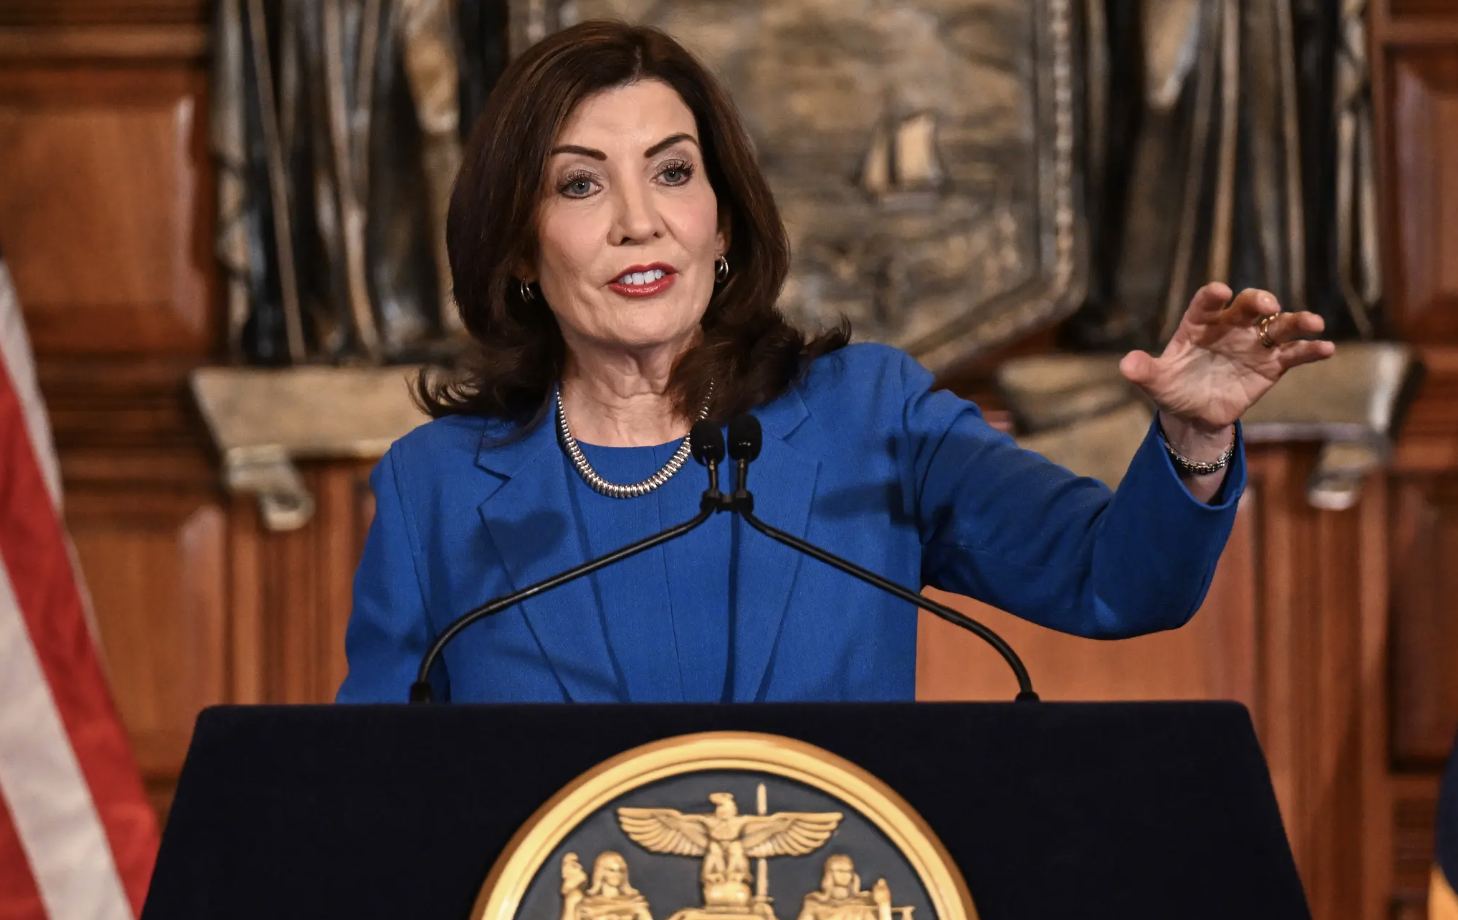 Albany Dems want to scrap Hochul’s proposed education cuts, raise taxes on high earners